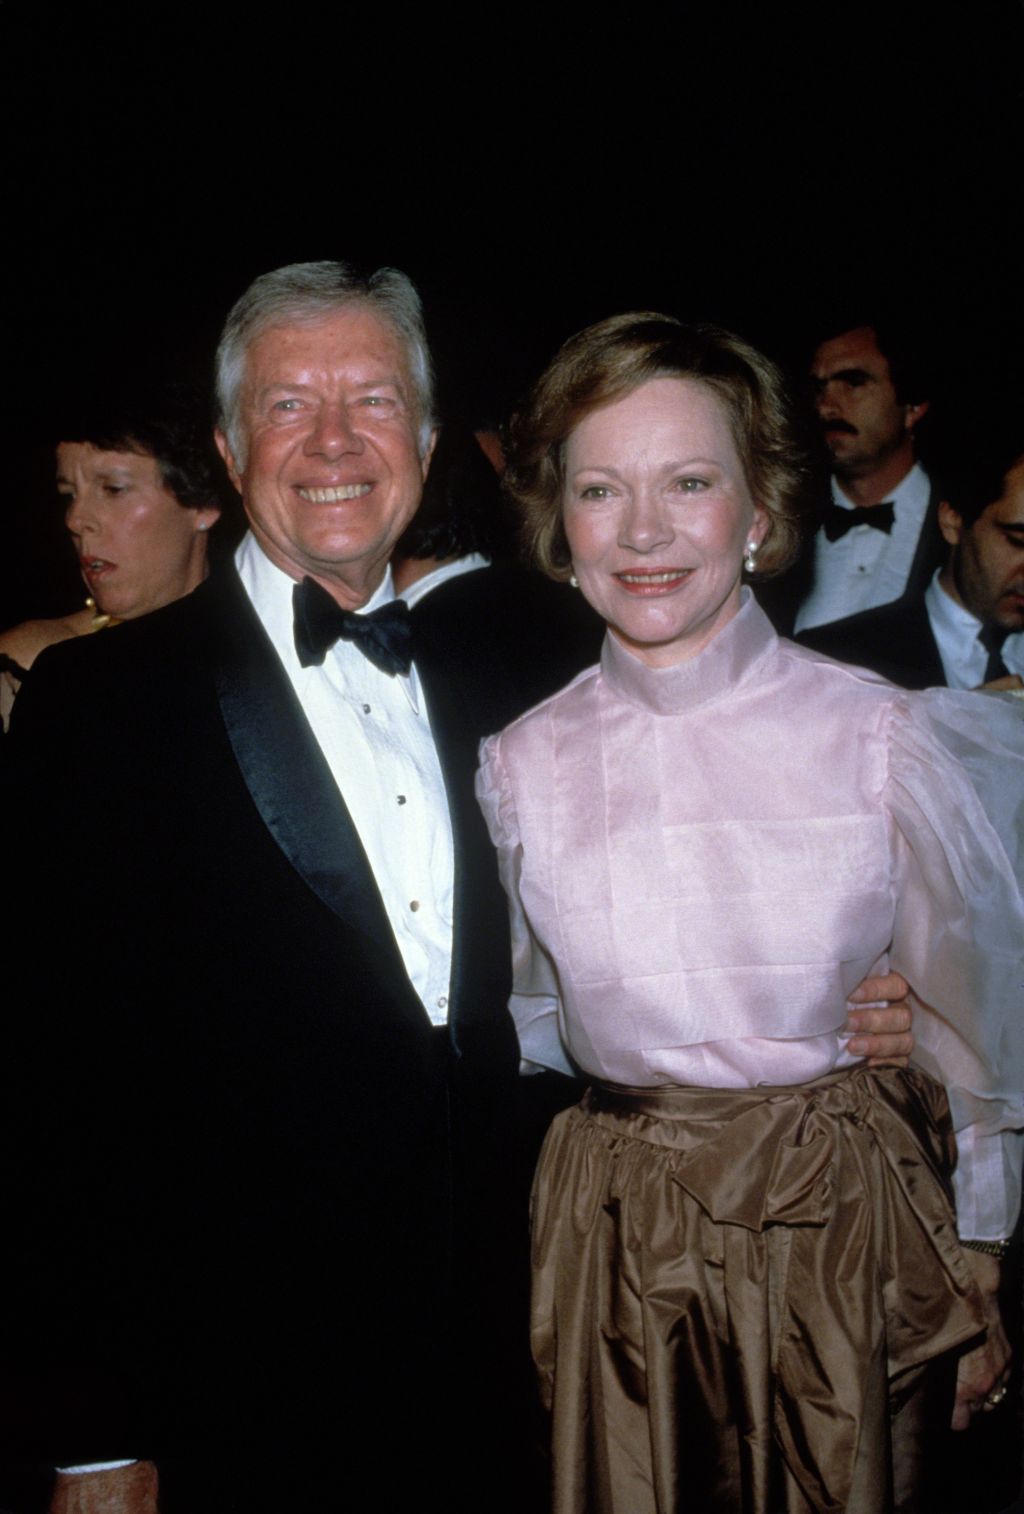 Jimmy Carter and Rosalynn Carter in 1980